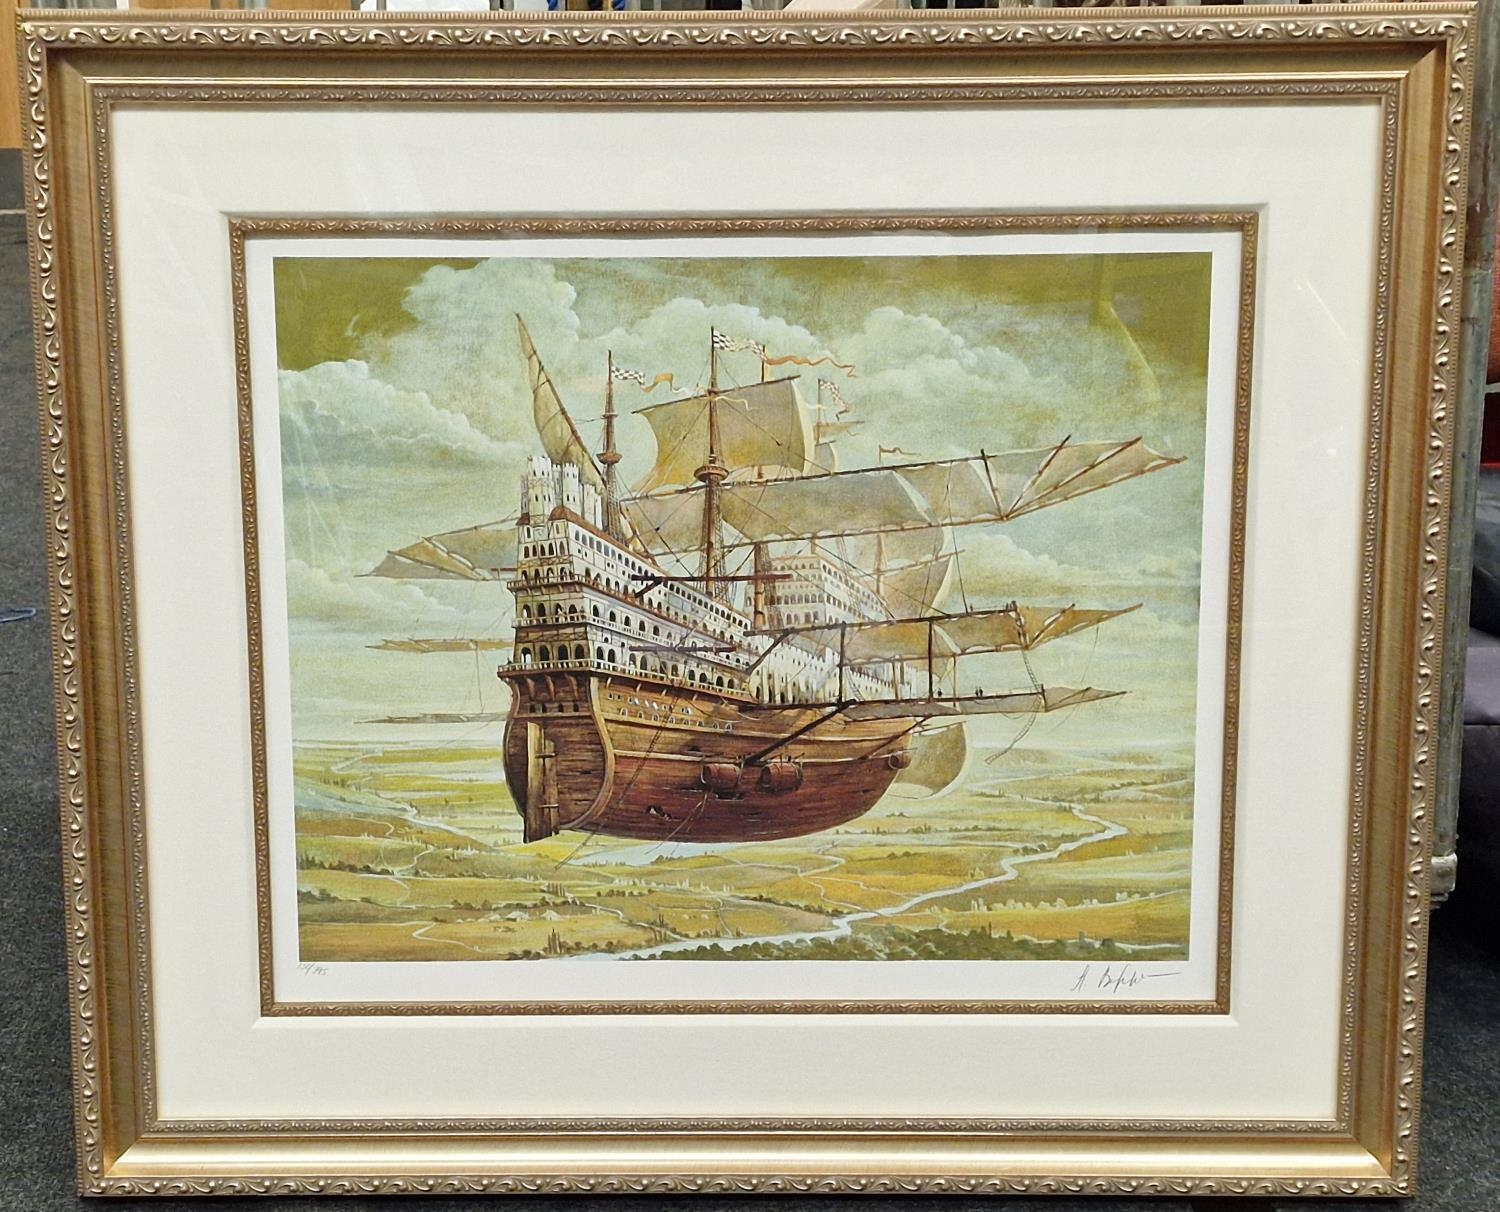 Andrey Vereshagin: Gilt framed and glazed limited edition serio lithograph print of a flying ship